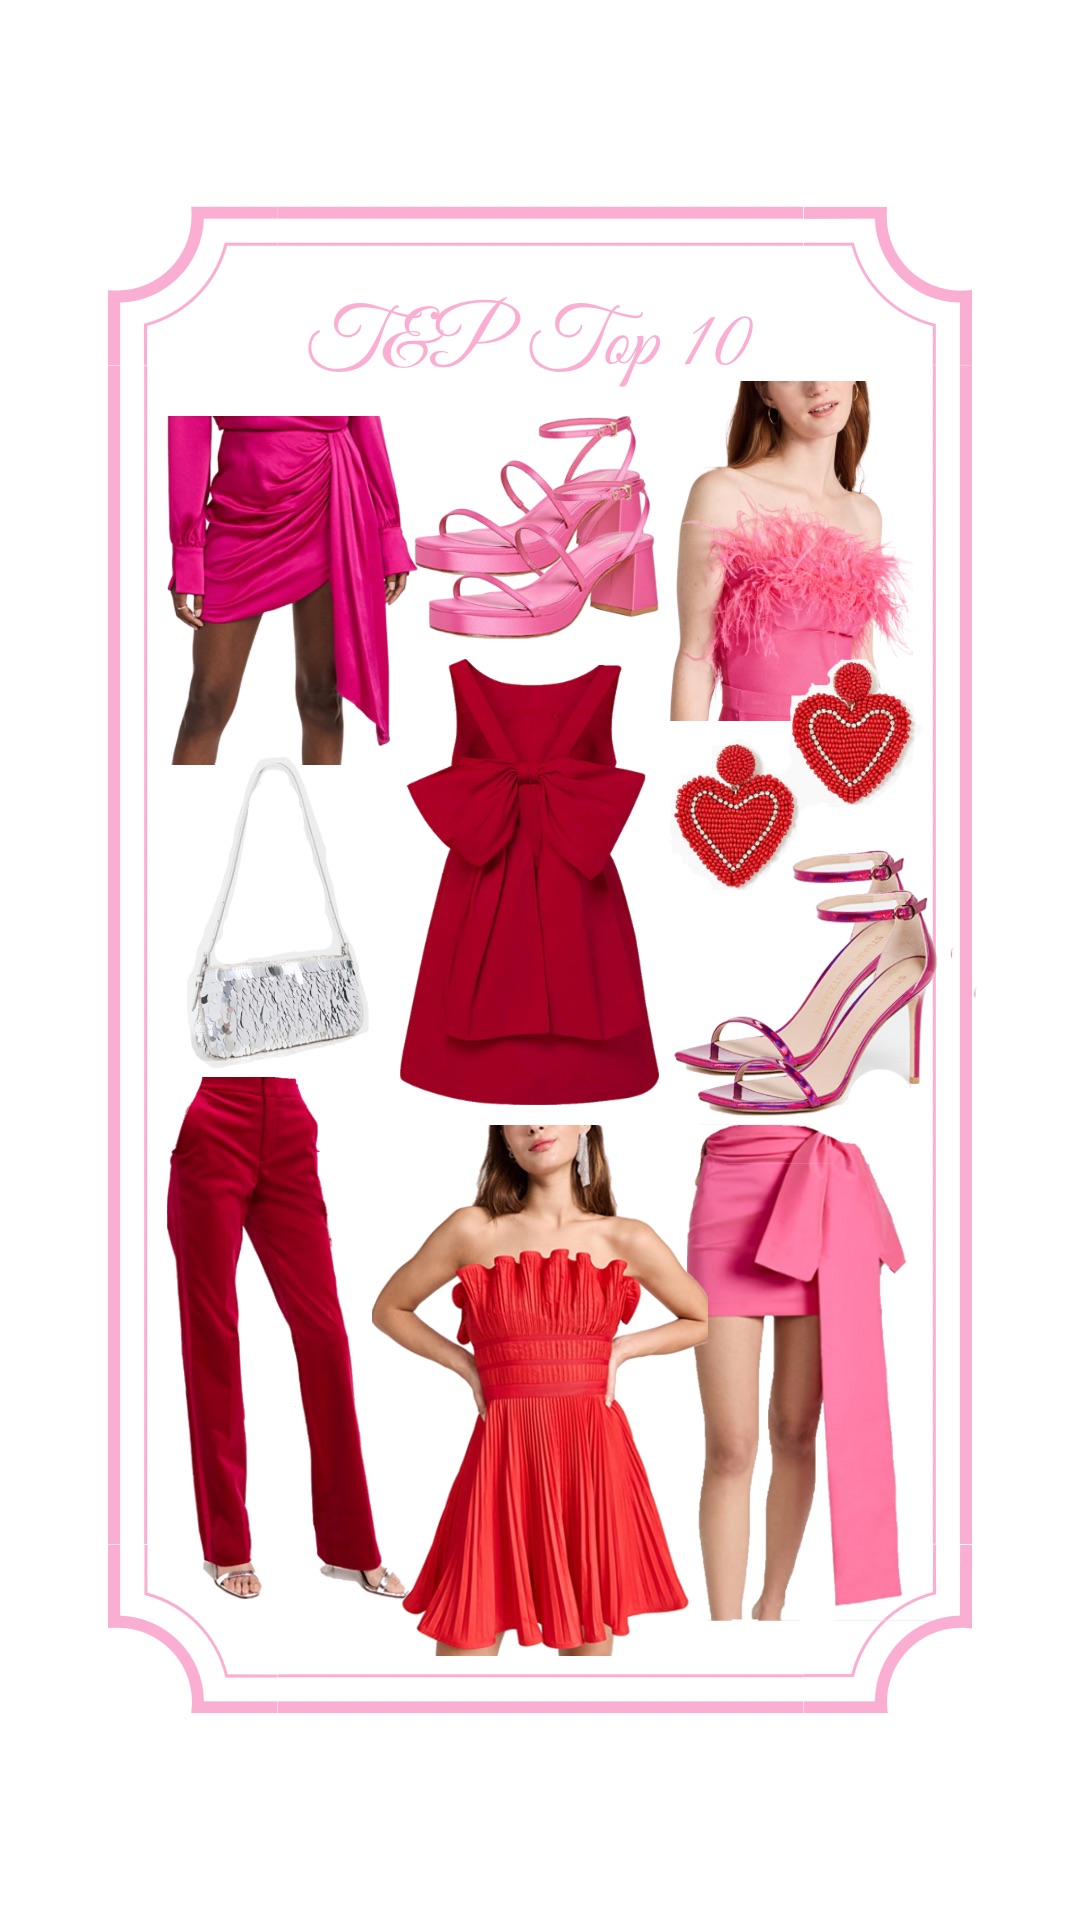 Valentine's Day, Galentine's Day, Pink Skirts, Feathers, Red Dresses, Heart Accessories, pink heels, silver sequin bag, feathers